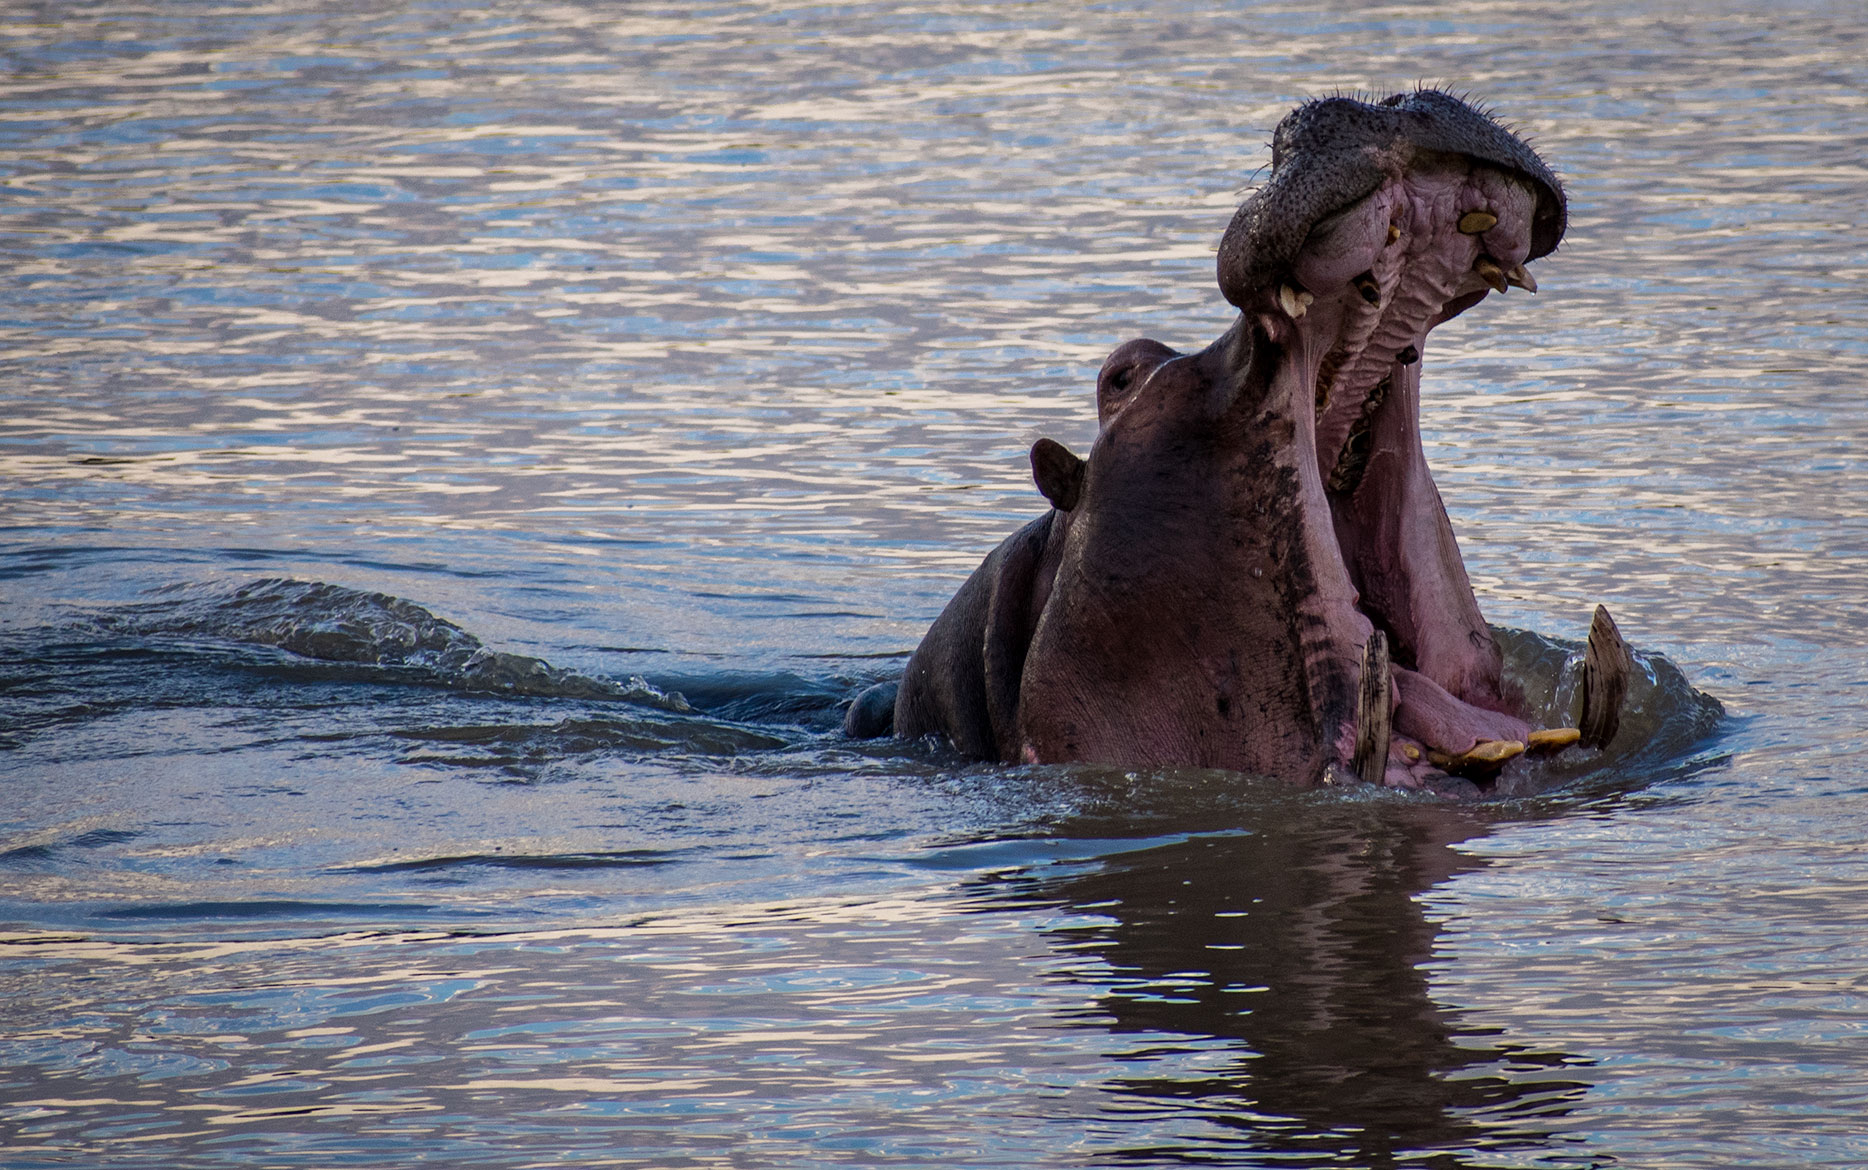 Hippo Highways: Day 2 of our Walking Safari